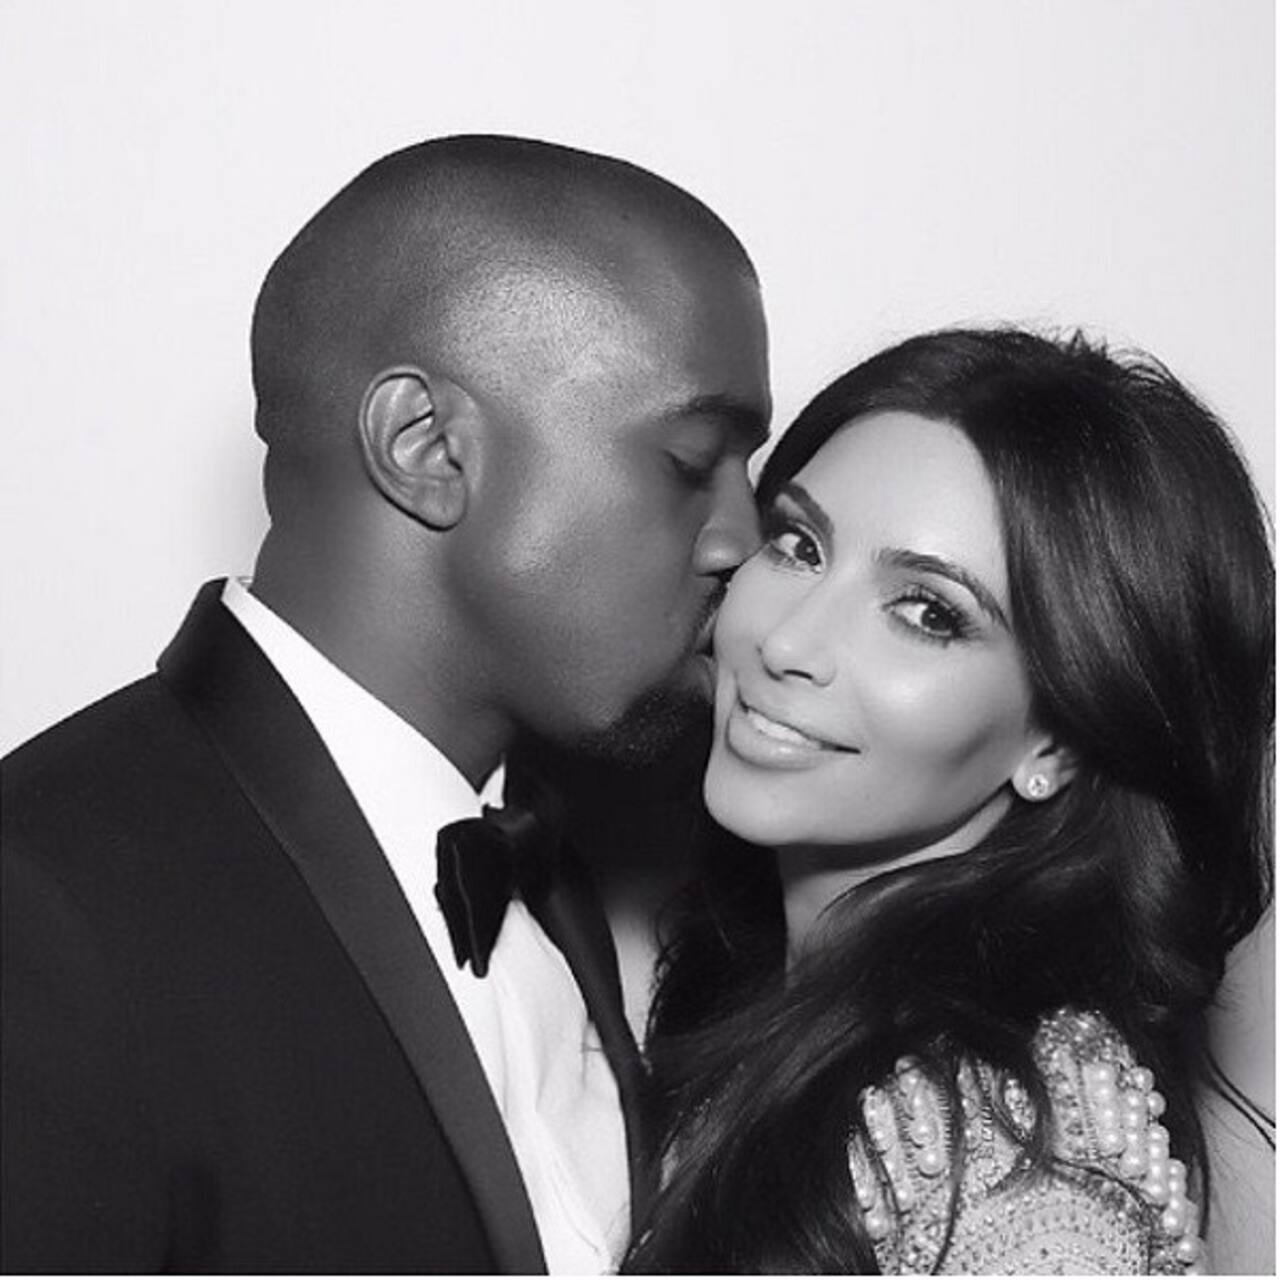 Is this the REASON behind Kim Kardashian filing for divorce from Kanye West? Here's what we know